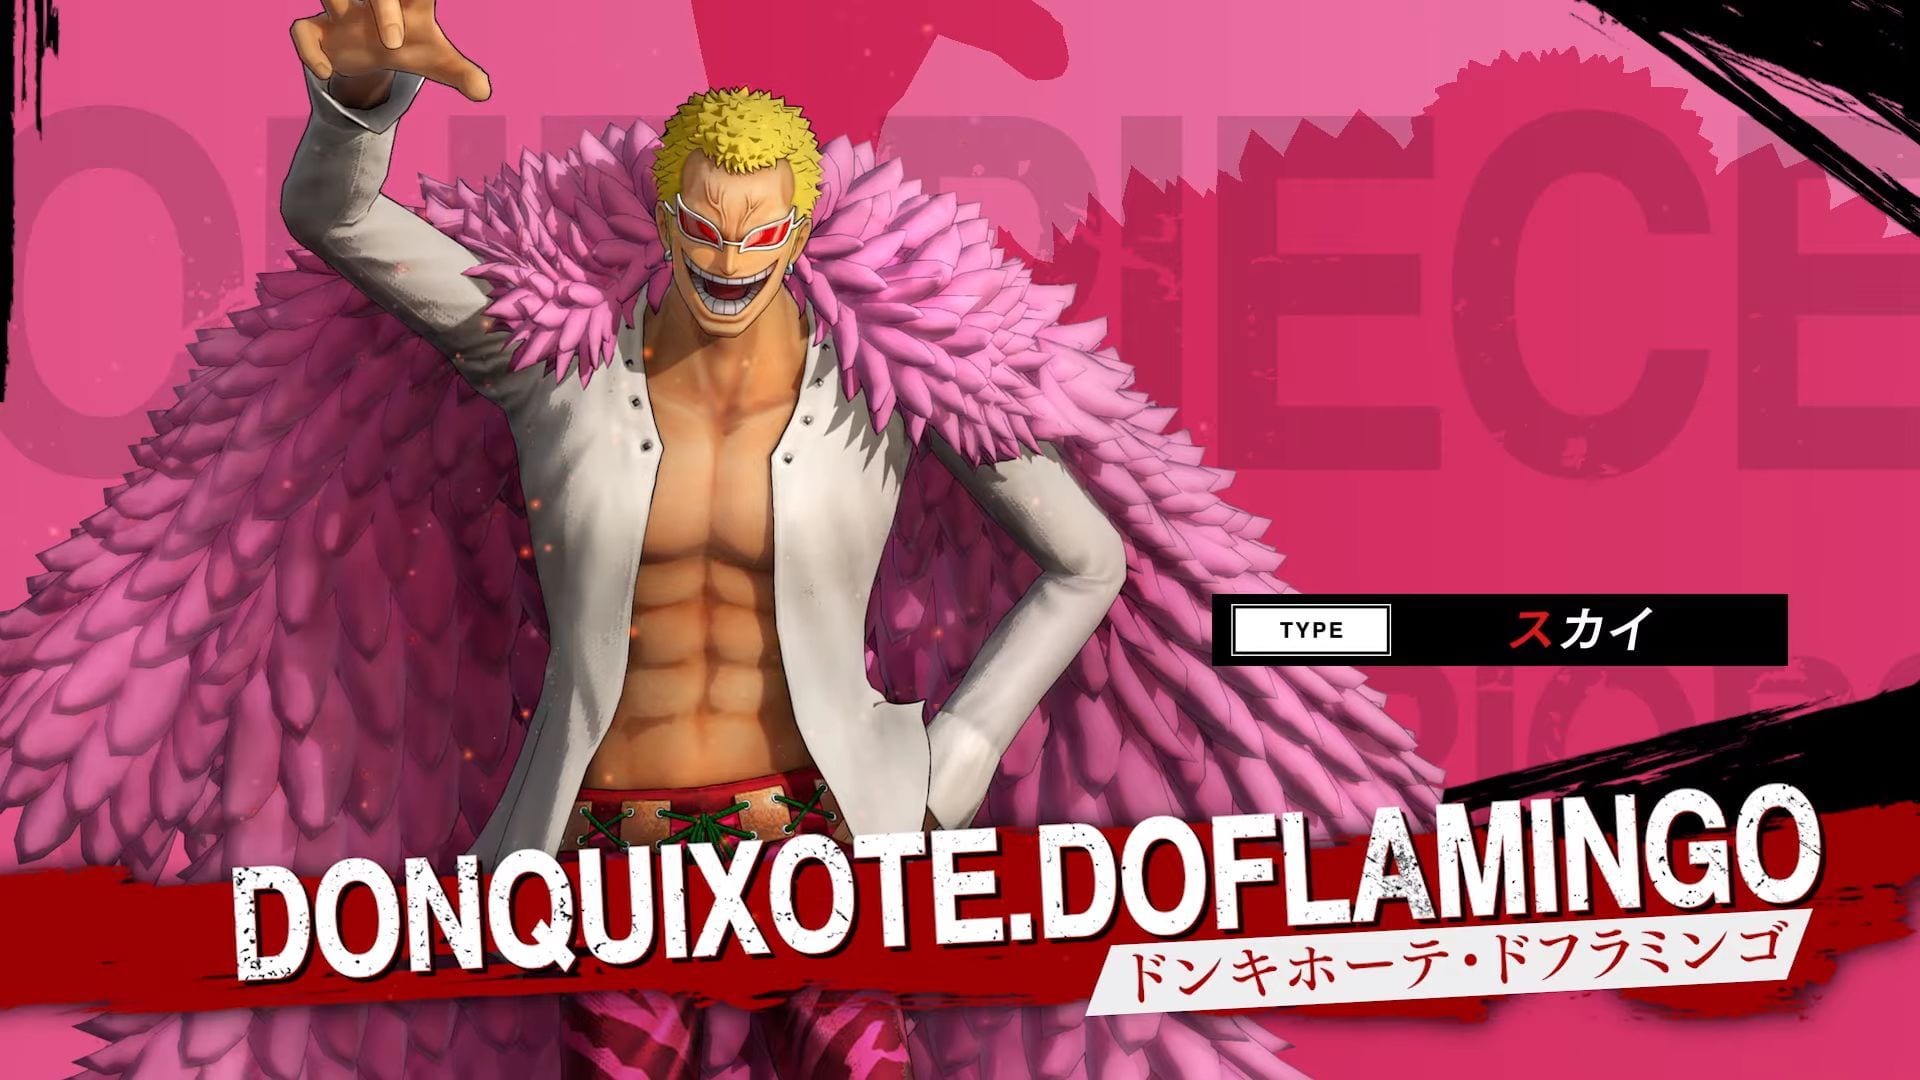 New One Piece Pirate Warriors 4 Trailers Show Donquixote Doflamingo And Issho In Action